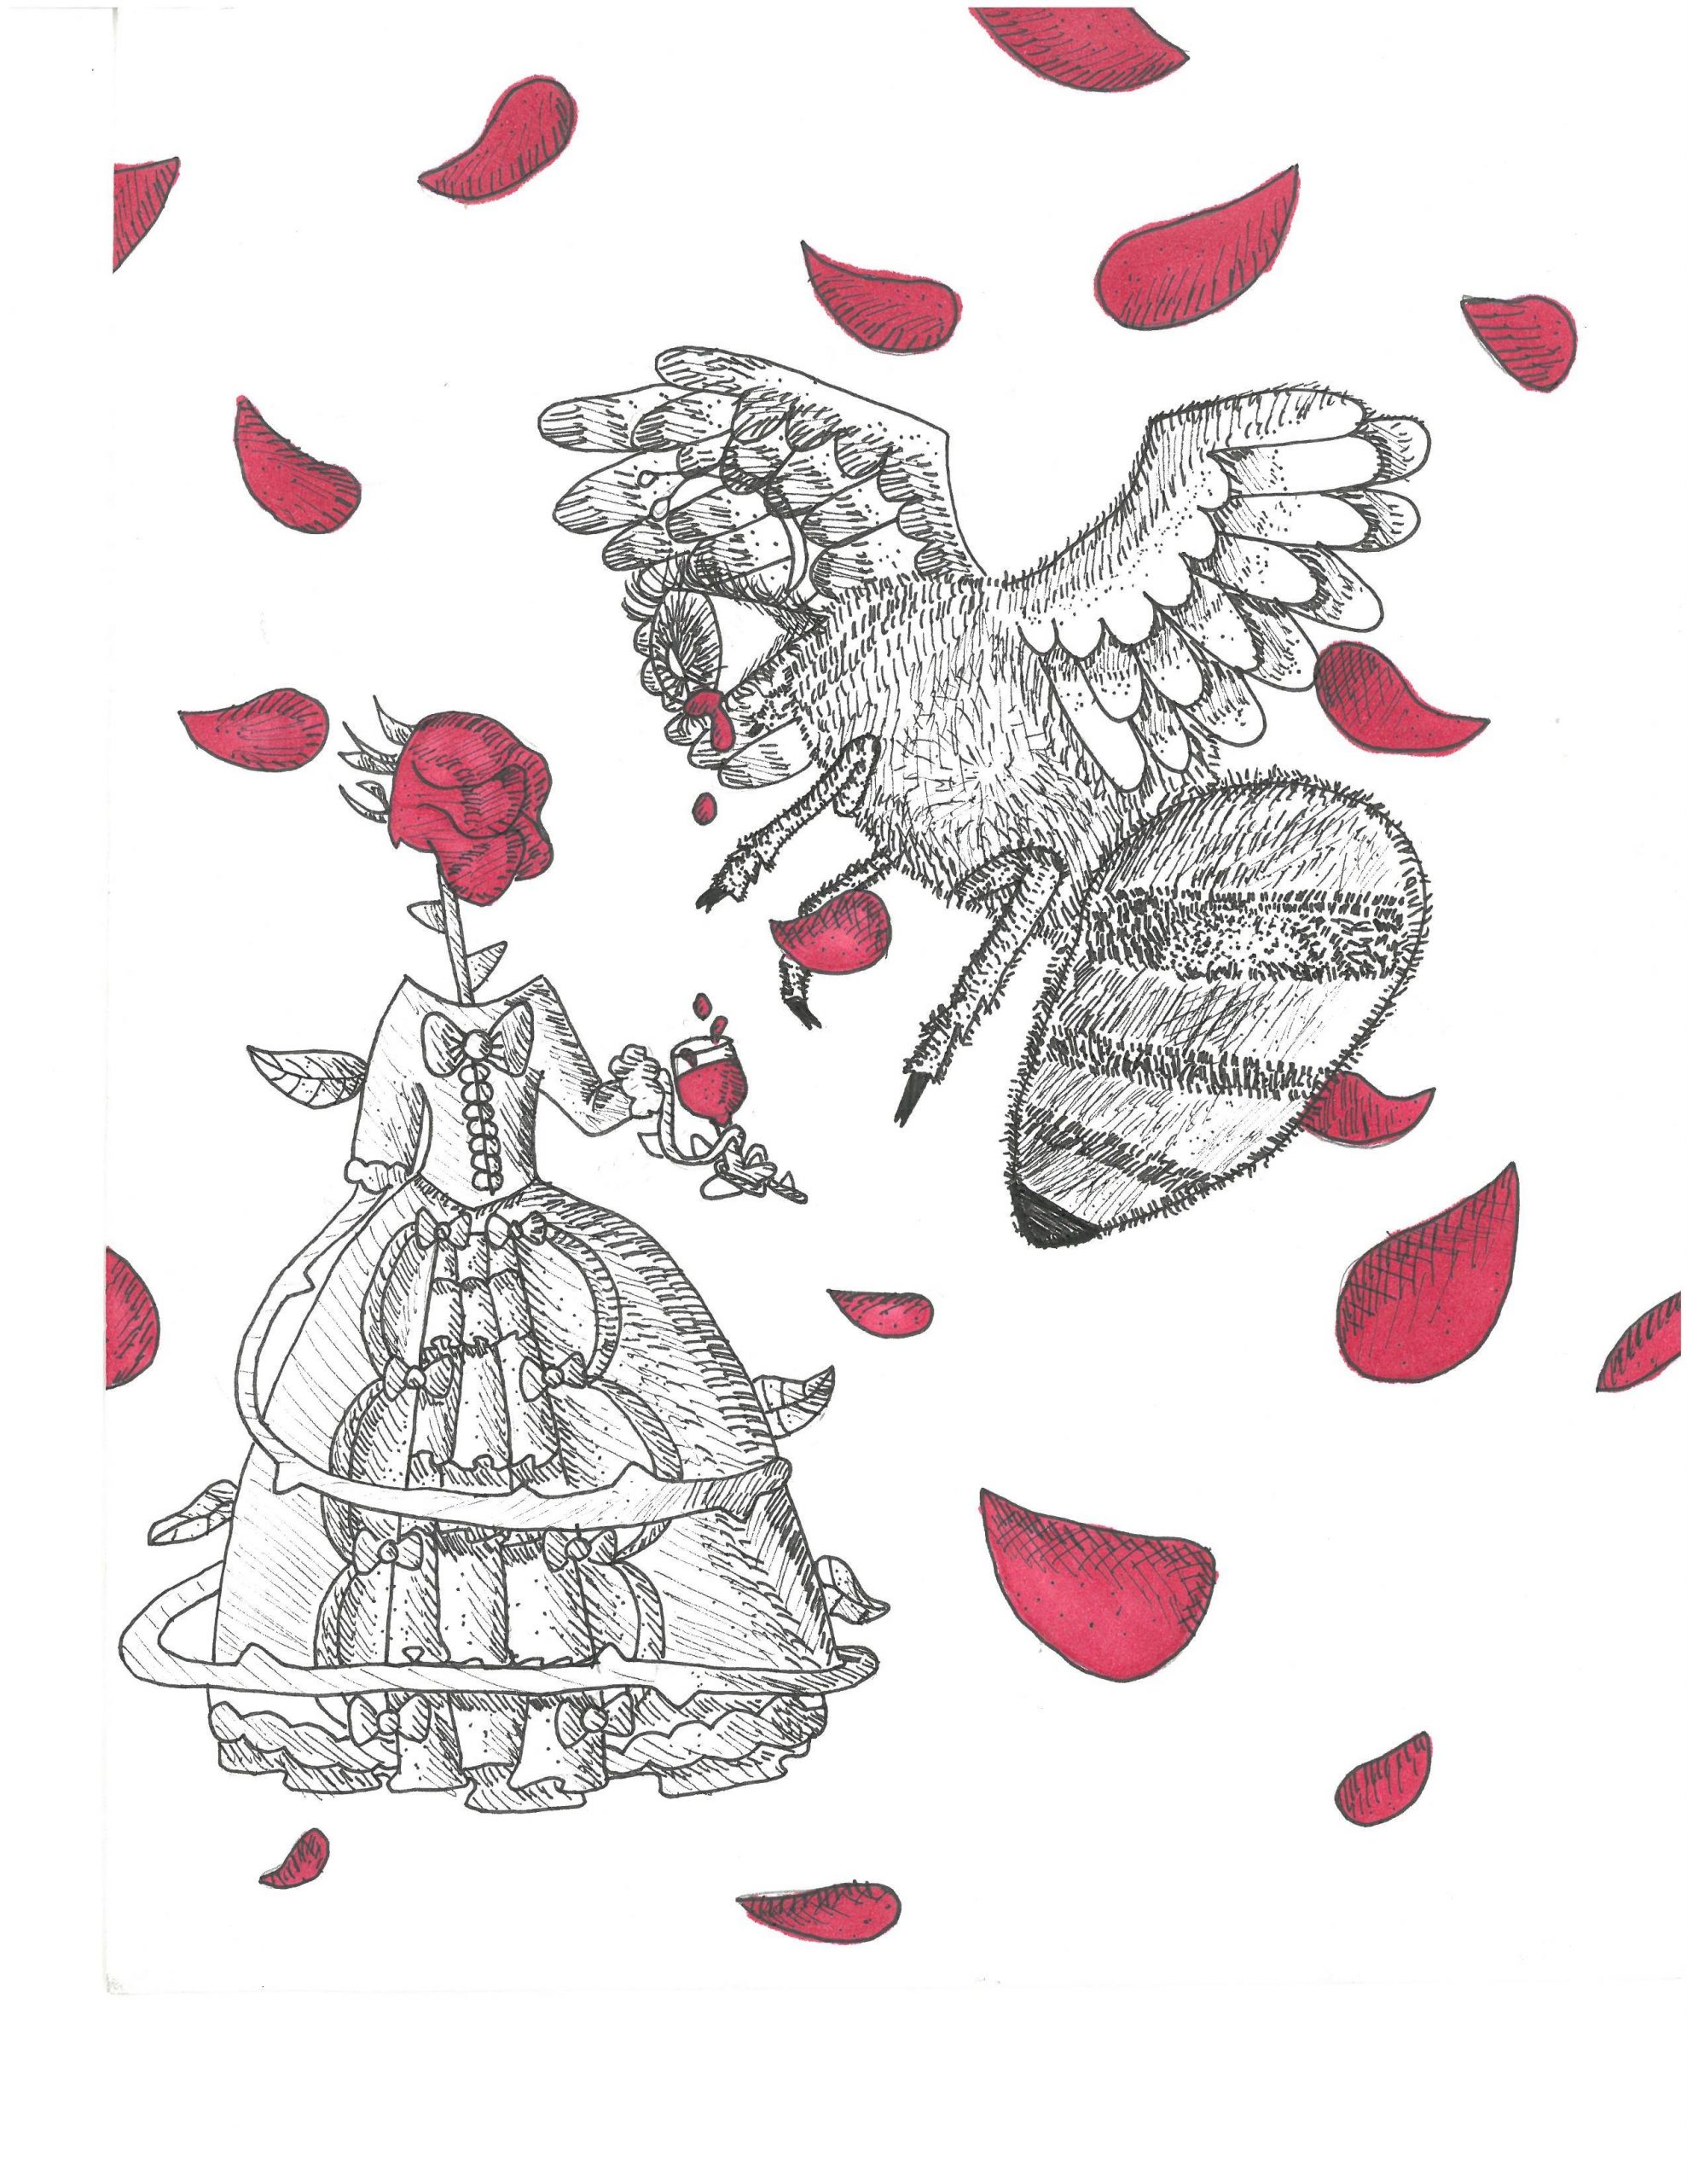 Black and white drawing of a woman with a red rose for head. Next to winged creature. Falling red rose petals.